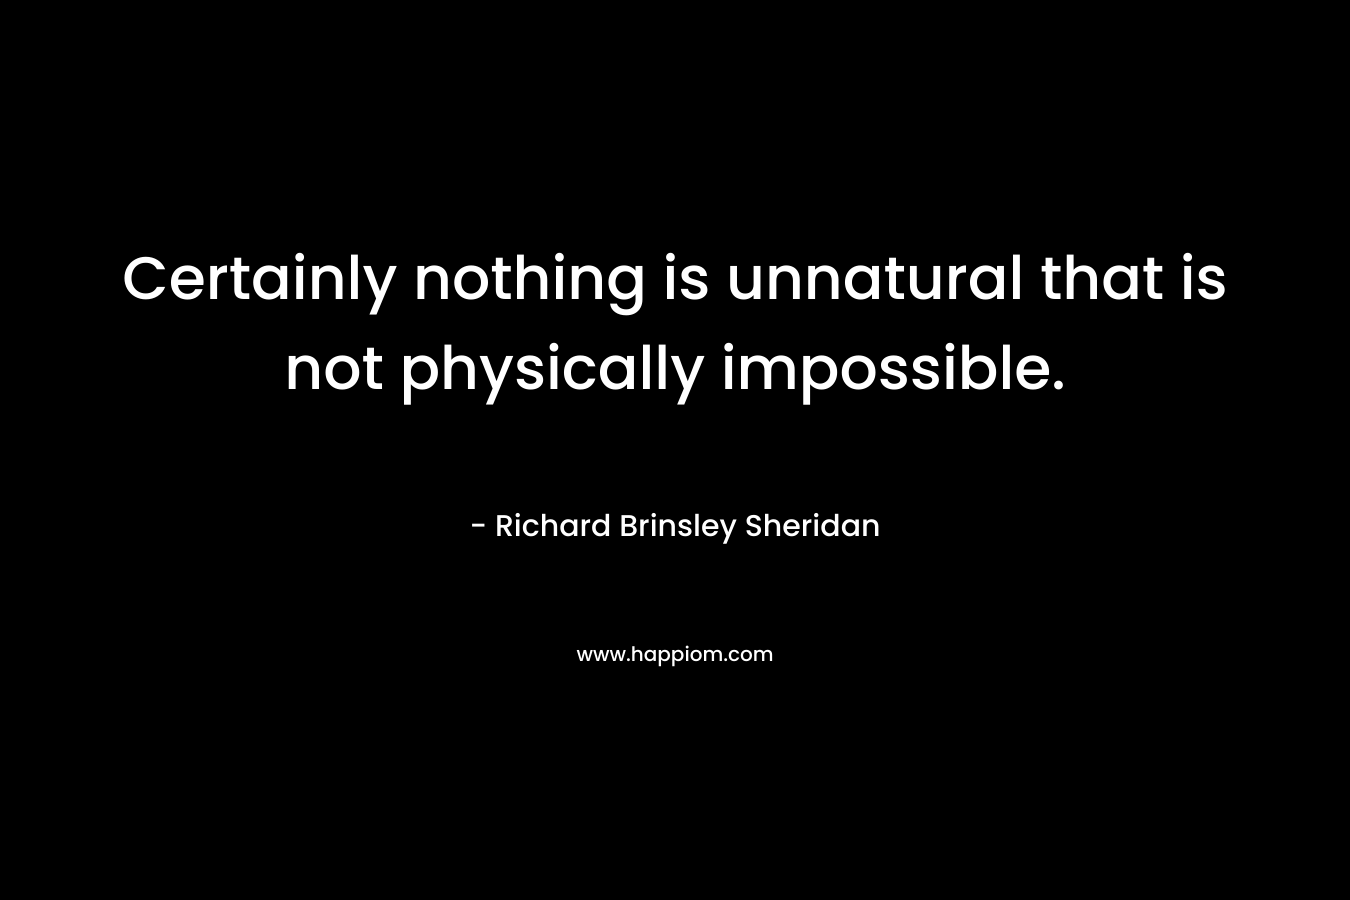 Certainly nothing is unnatural that is not physically impossible. – Richard Brinsley Sheridan